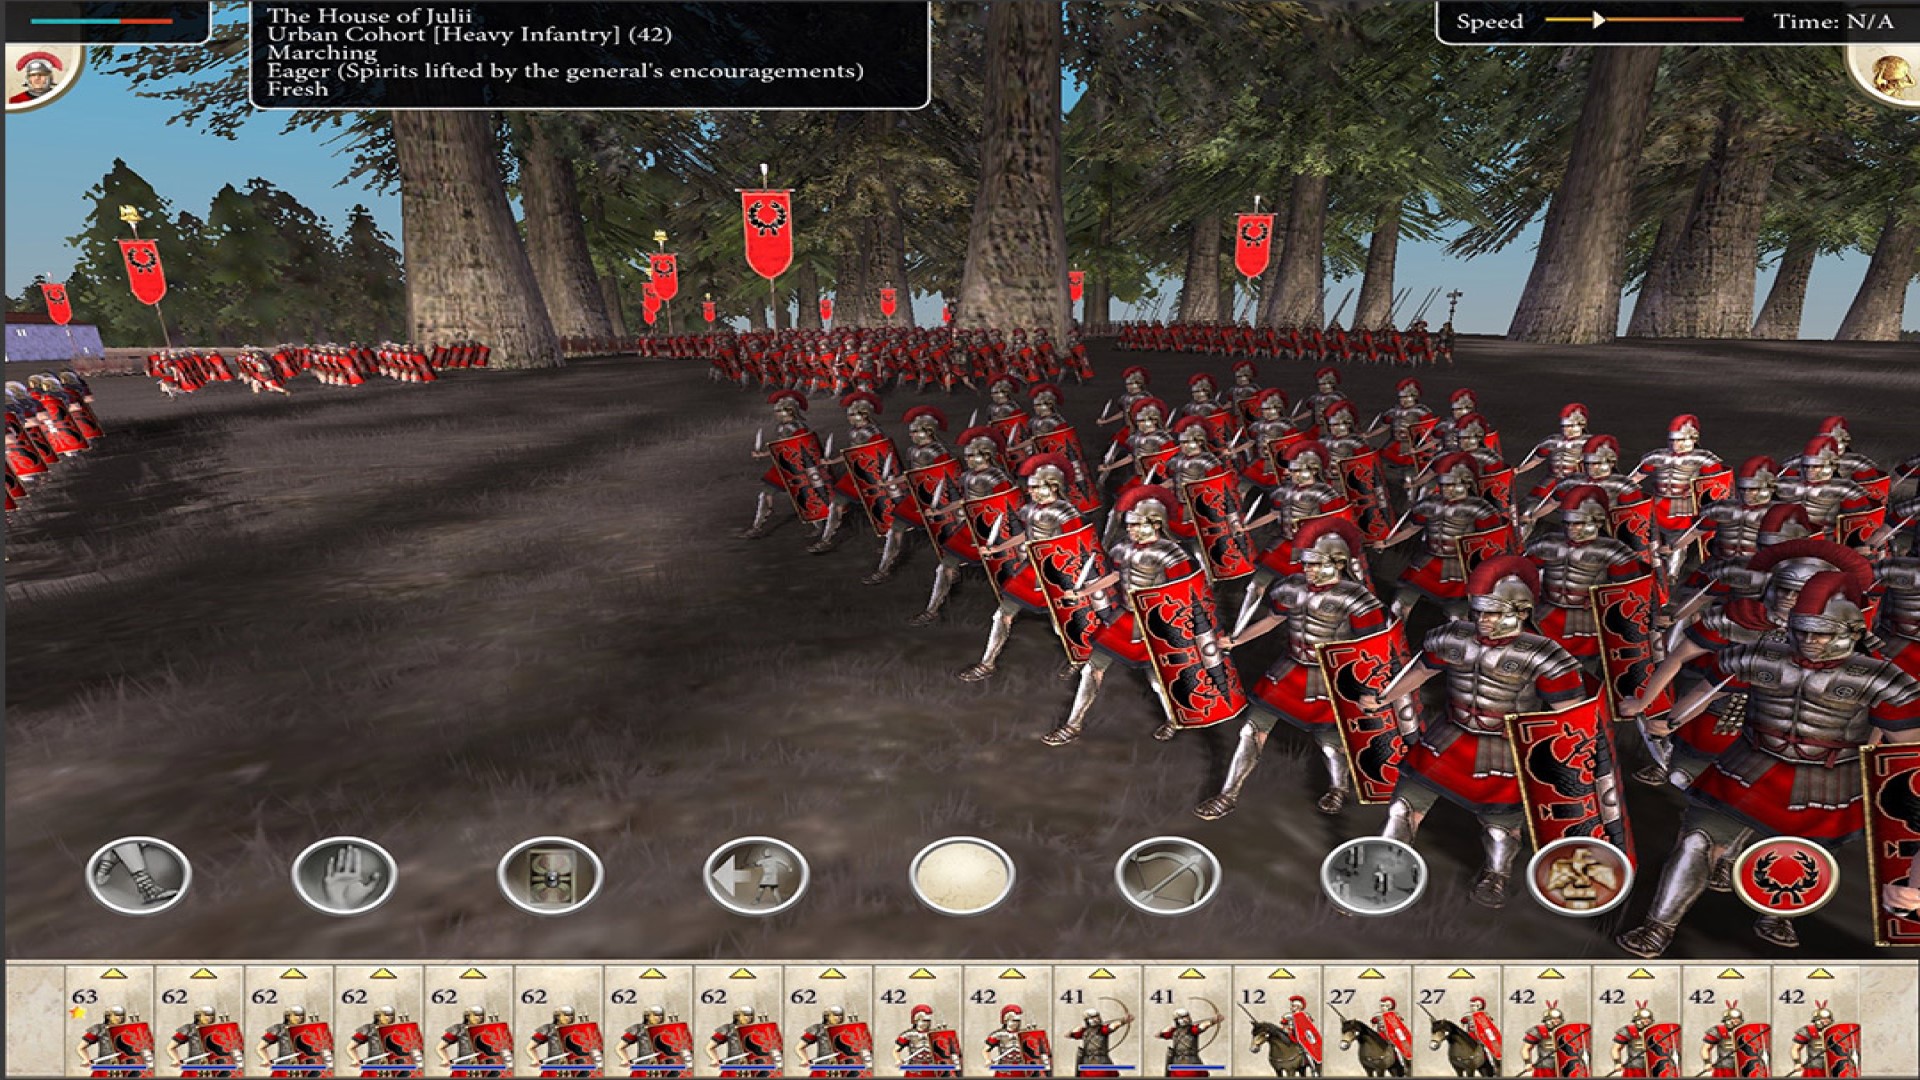 Best mobile strategy games: Rome: Total War. Image shows Roman soldiers marching along.